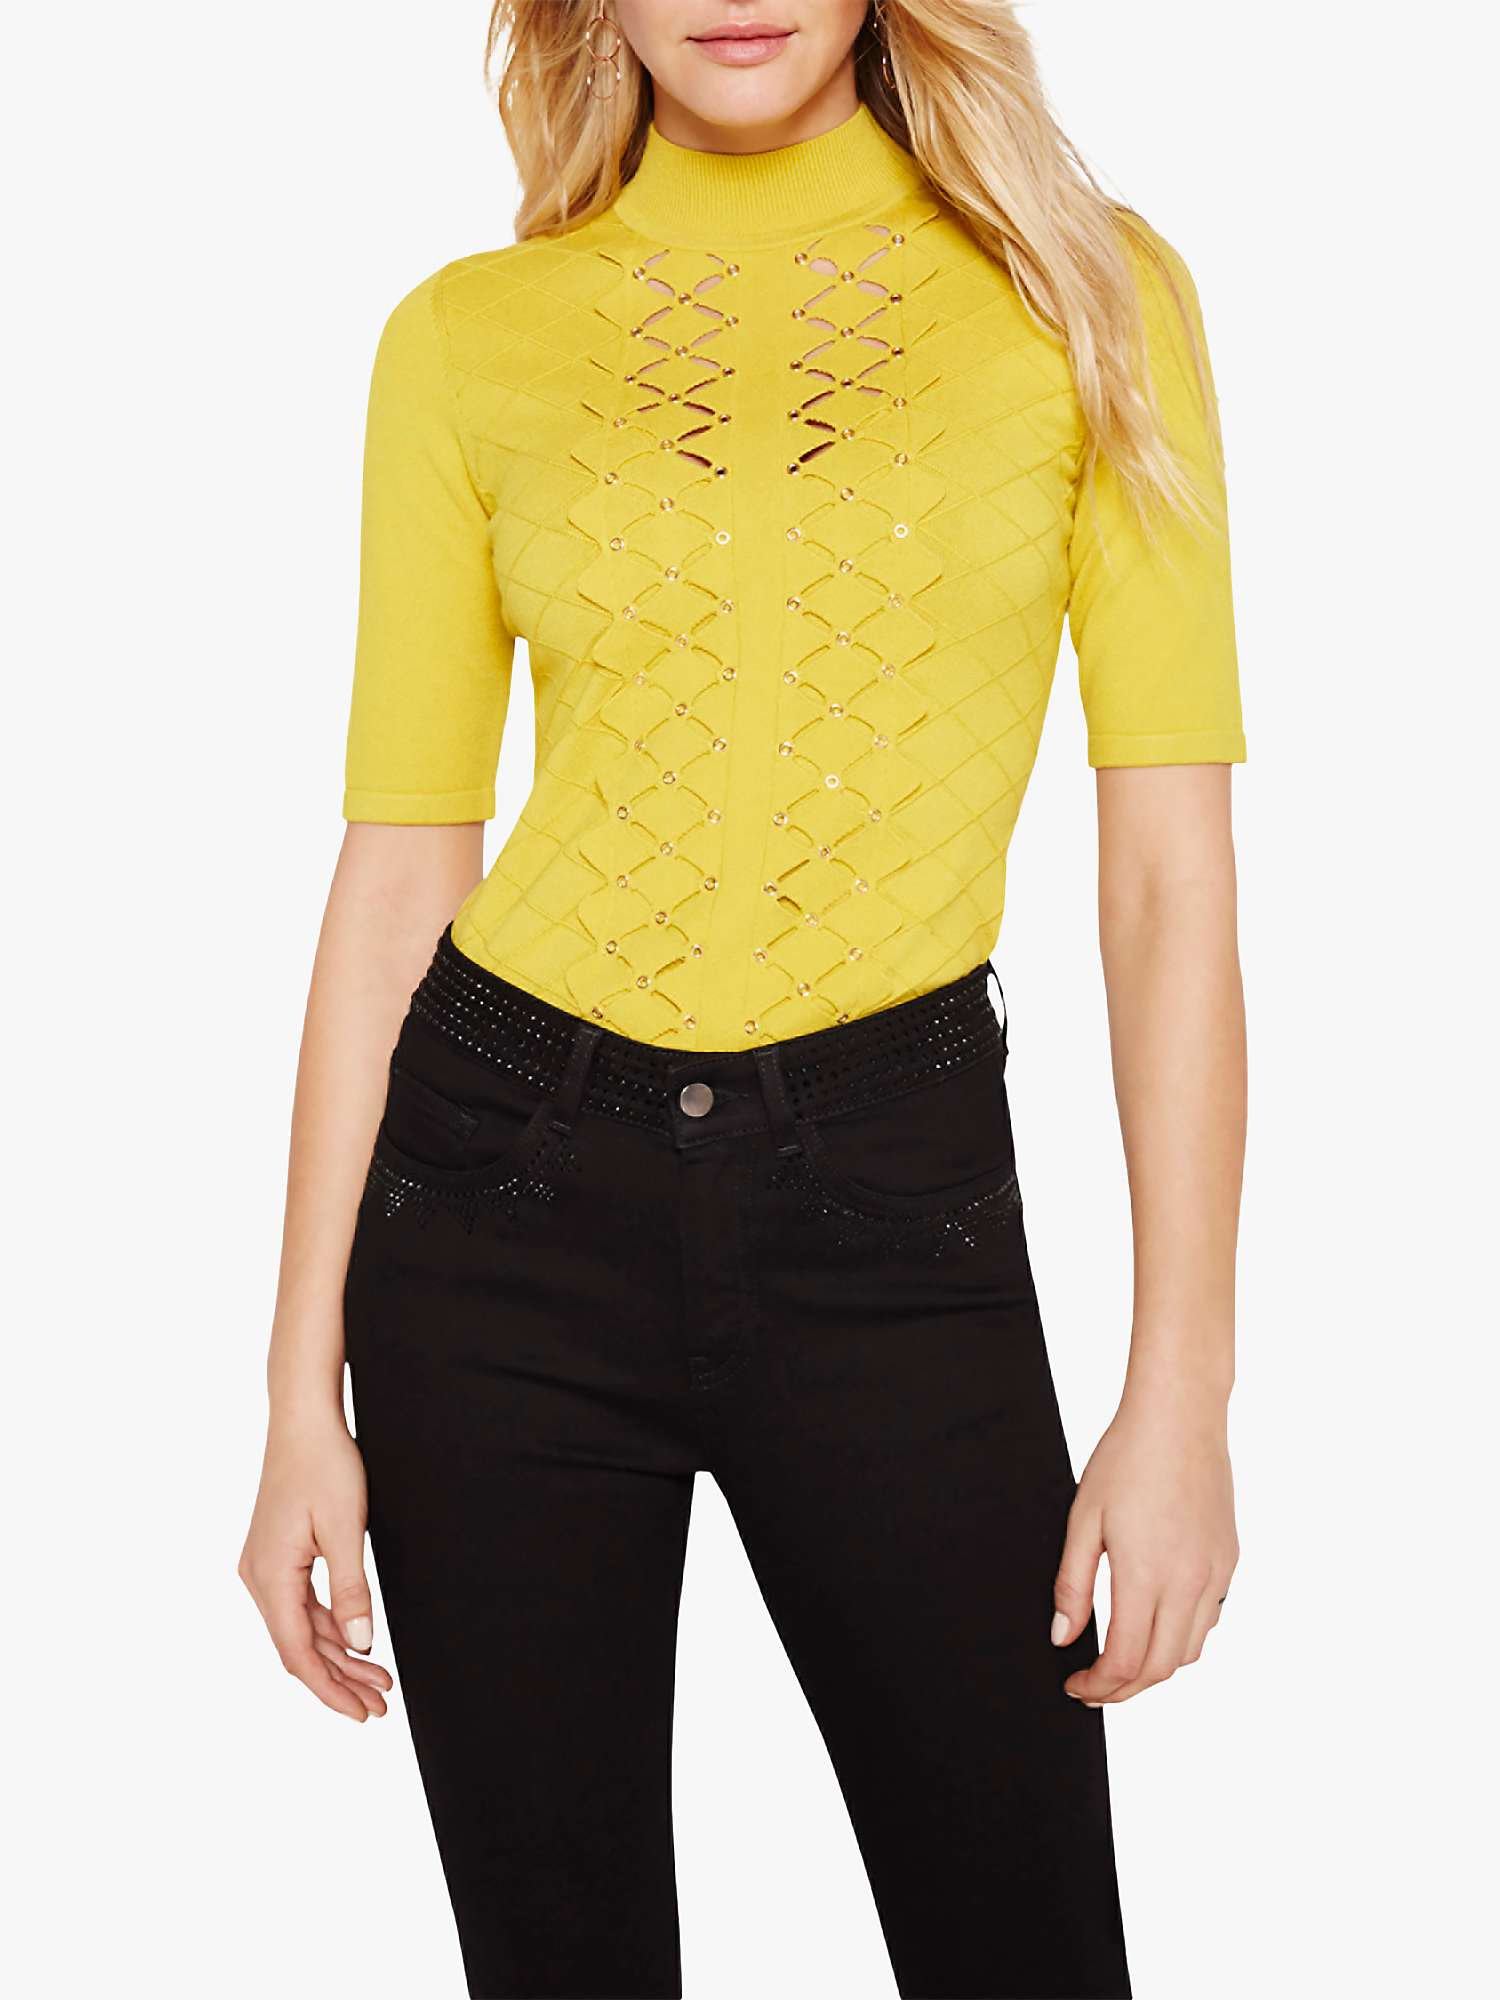 Buy Damsel in a Dress Leona Eyelet Cutout Knitted Top, Mustard Online at johnlewis.com